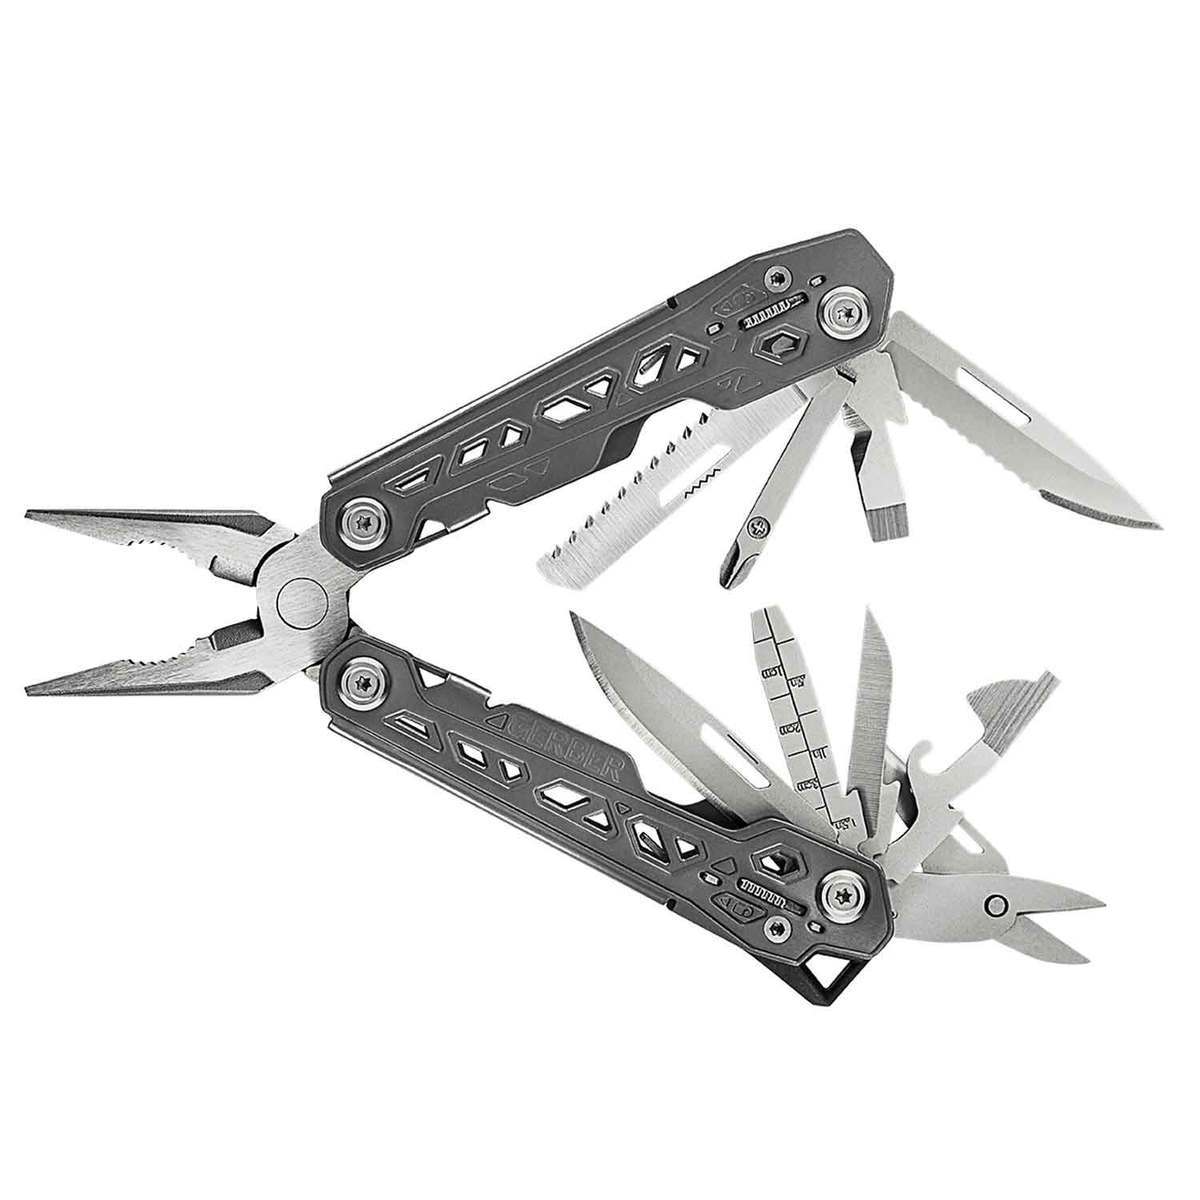 Gerber Saltwater Warehouse Purchase Discounted